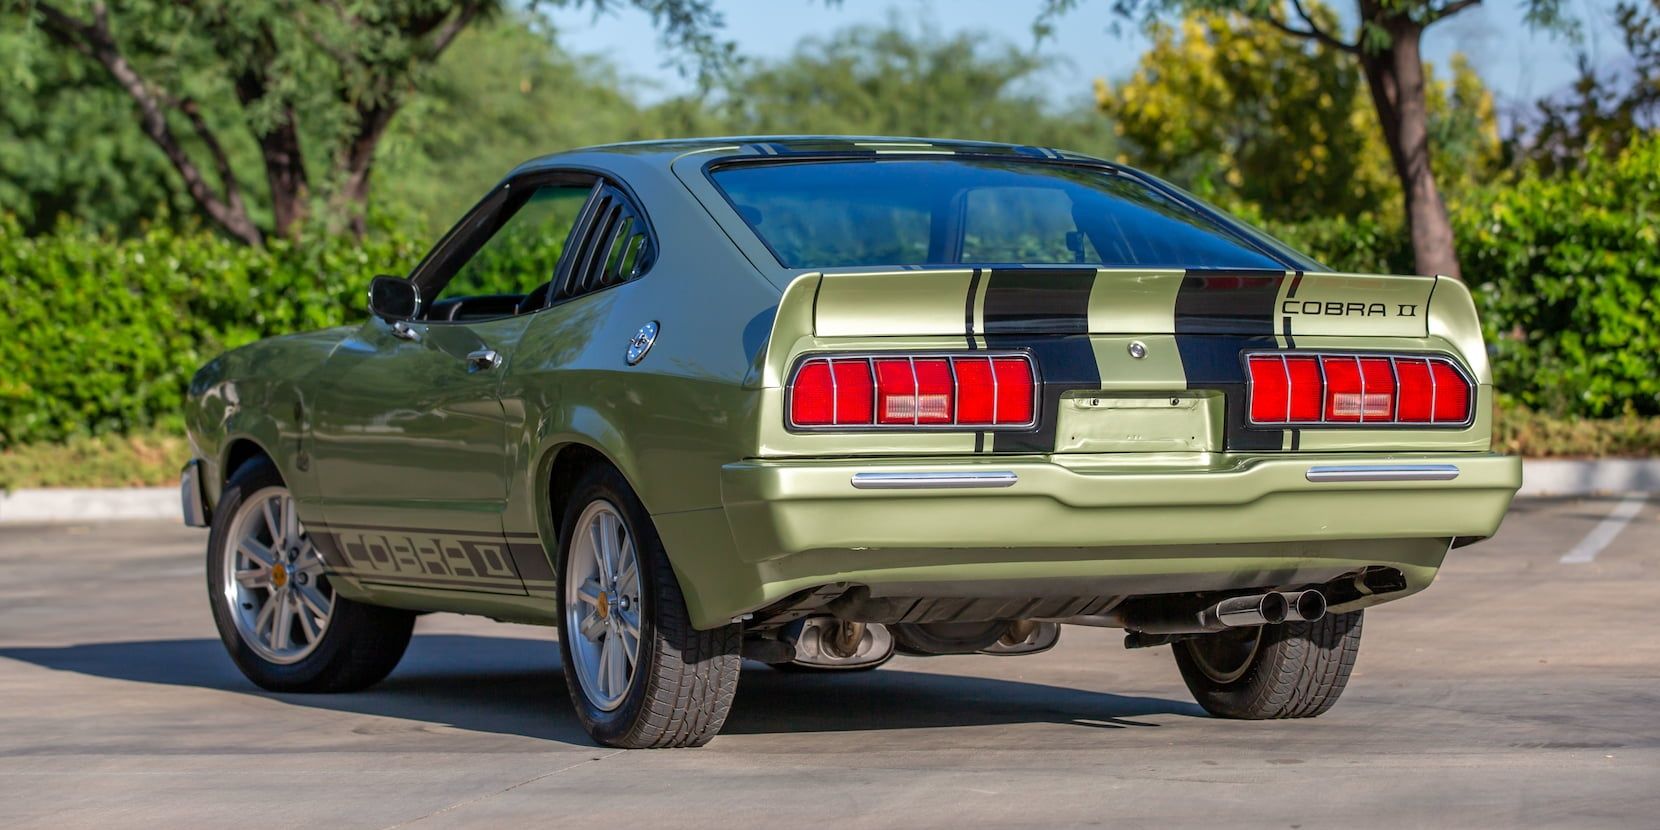 1977 Ford Mustang Cobra II Cropped